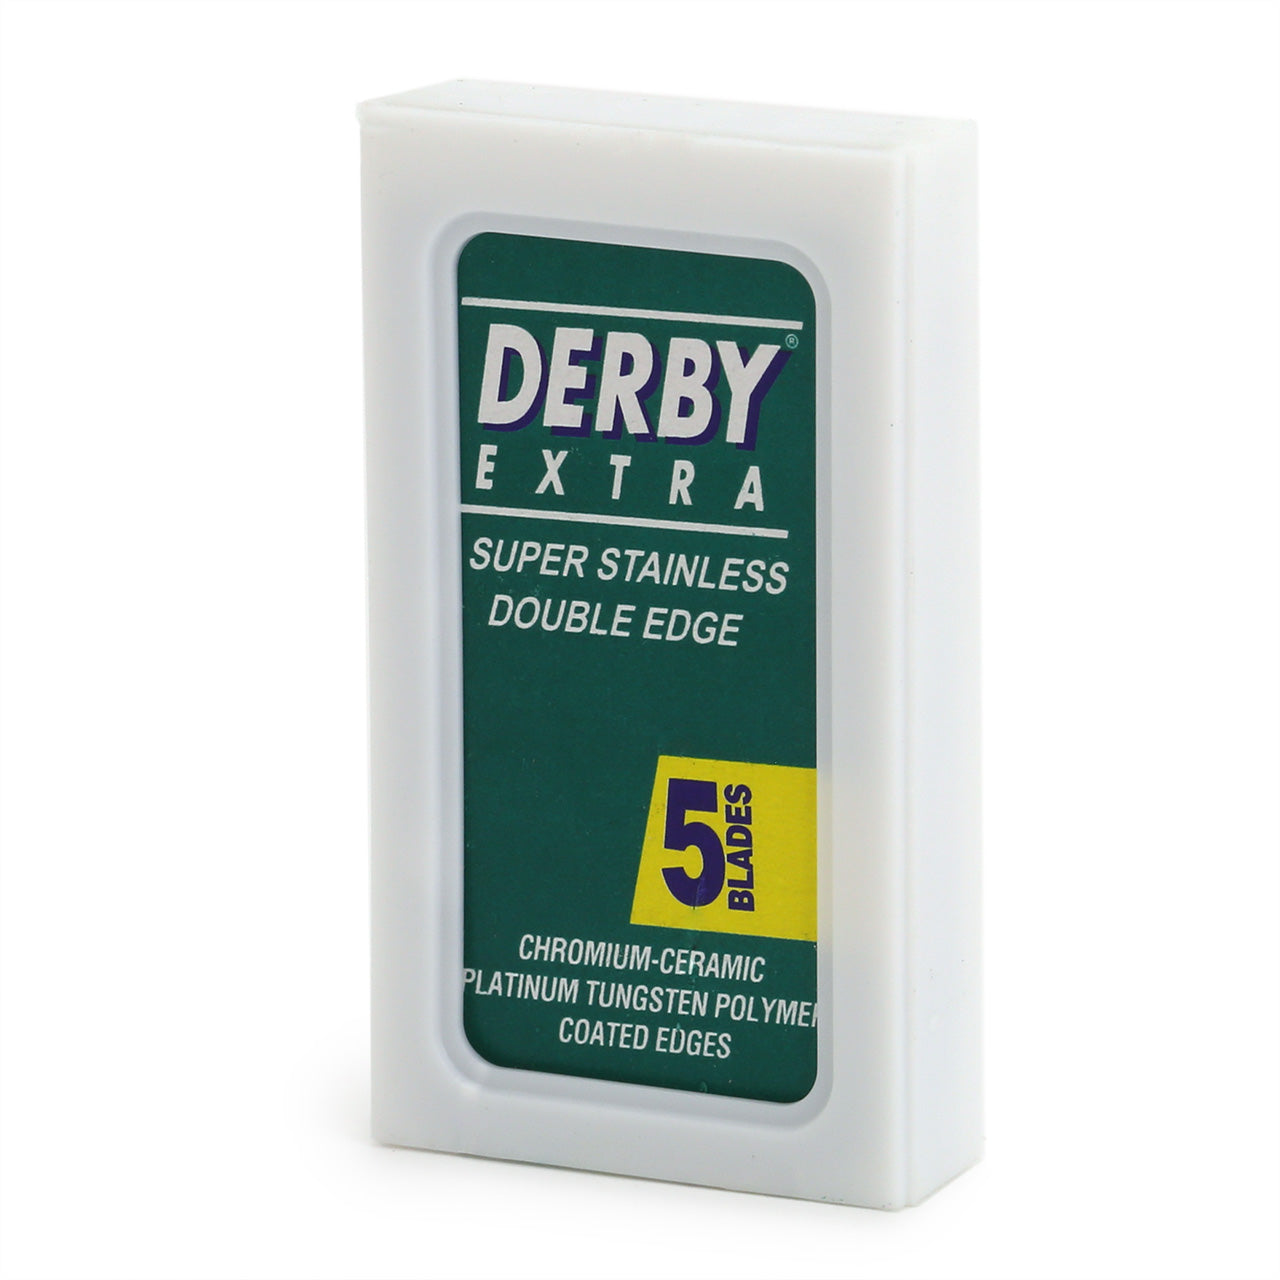 Derby Extra tuck of 5 blades comes in a white travel container which will hold the used blades in the back